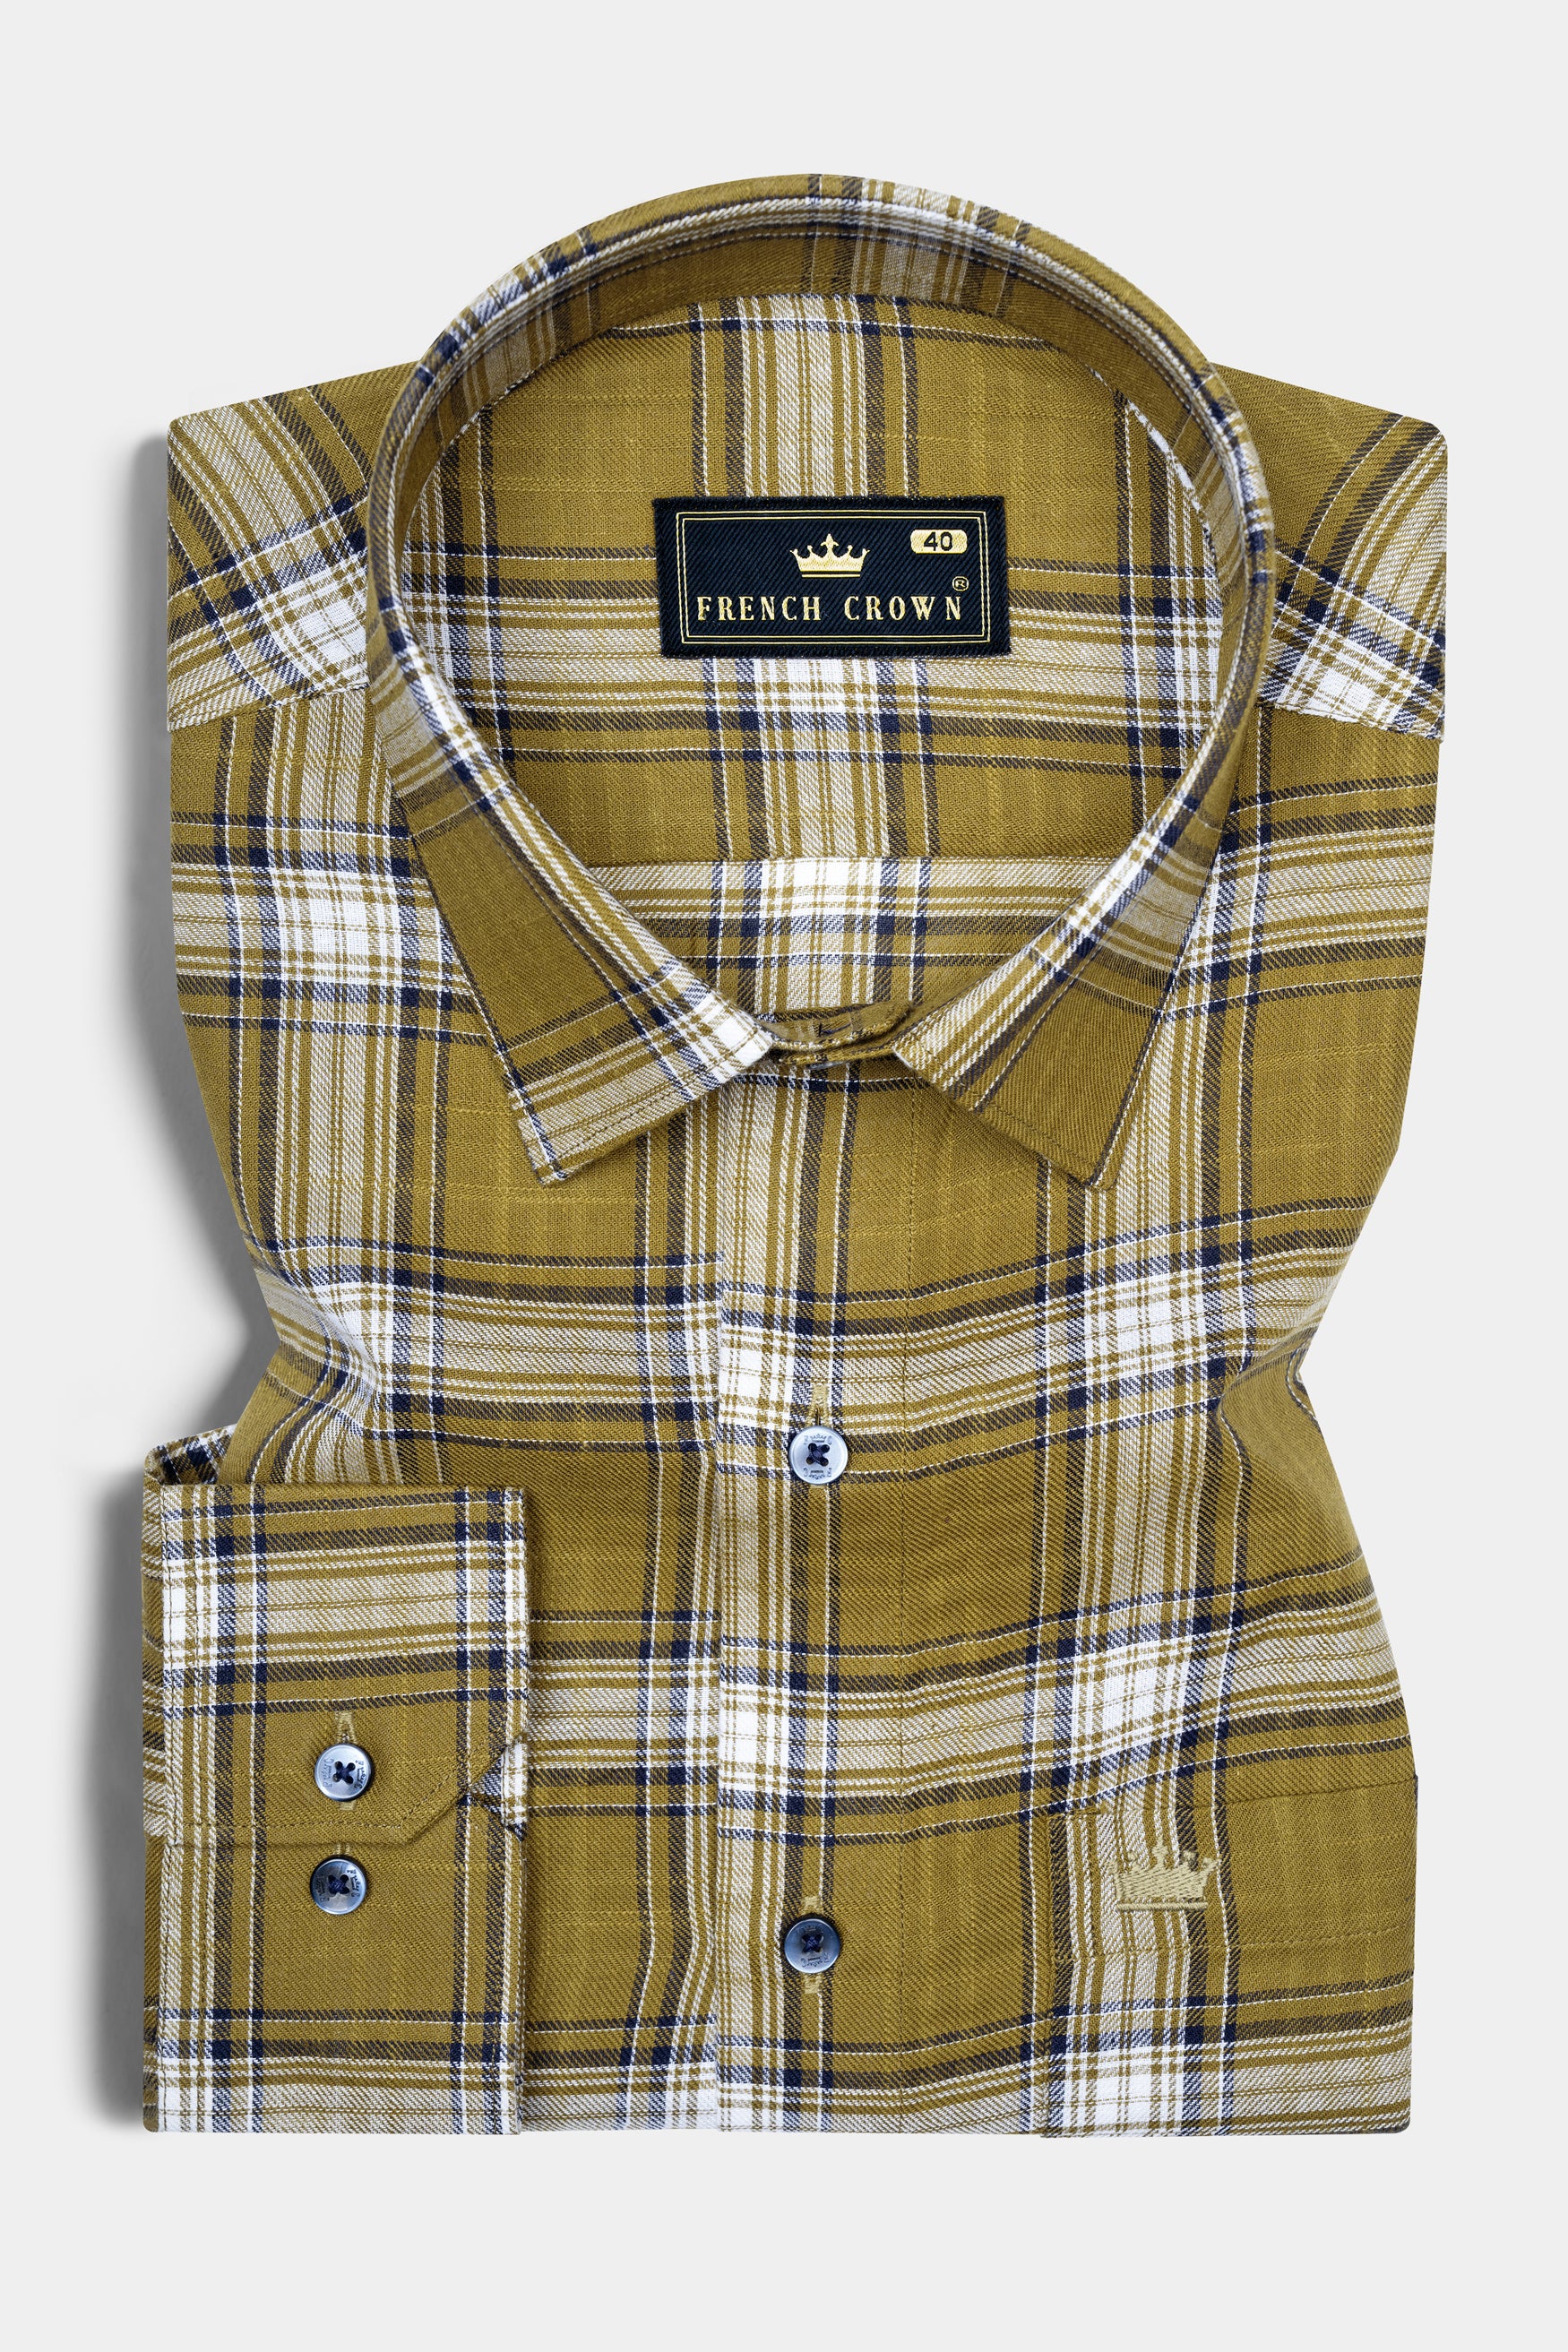 Sycamore Olive with Mirage Blue and Mercury White Plaid Twill Premium Cotton Shirt